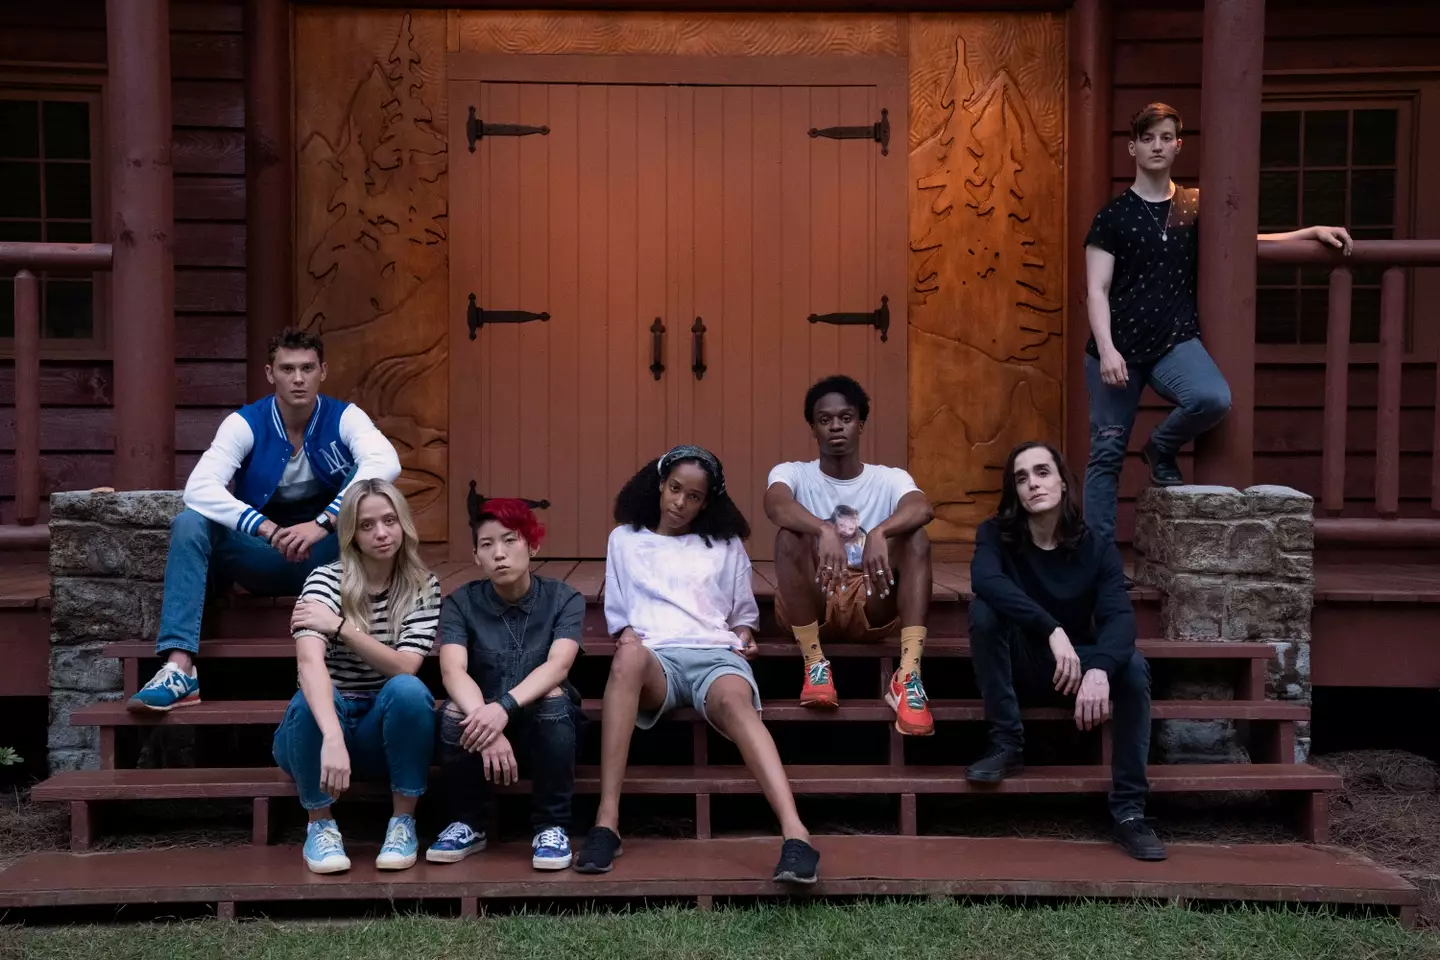 Say hello to the teens attempting to survive a gay conversion camp and a serial killer, in true horror style it's likely not all of them will survive to the end.